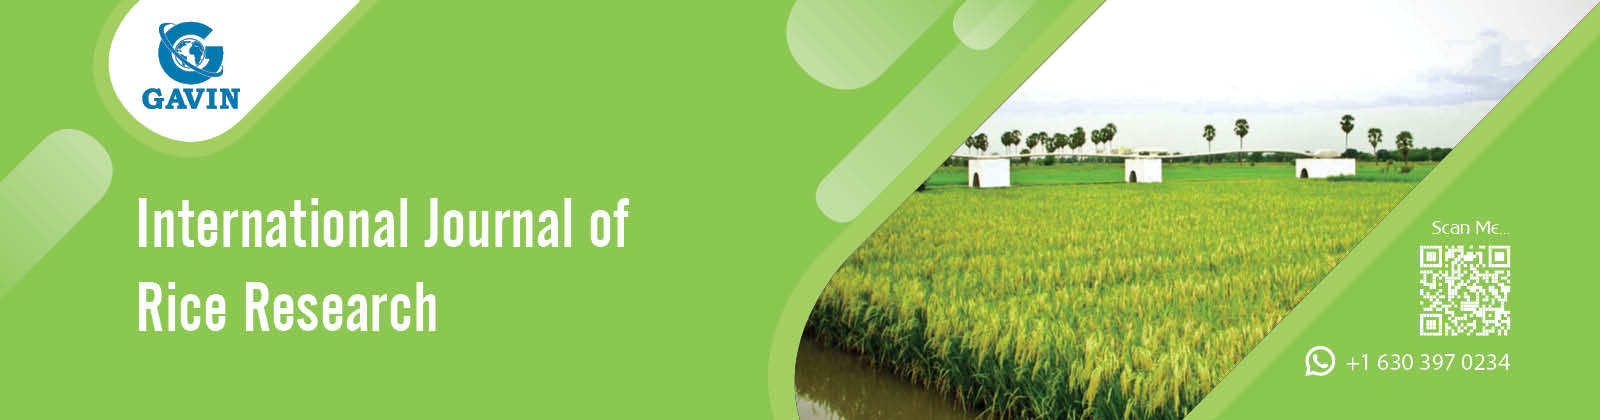 International Journal of Rice Research